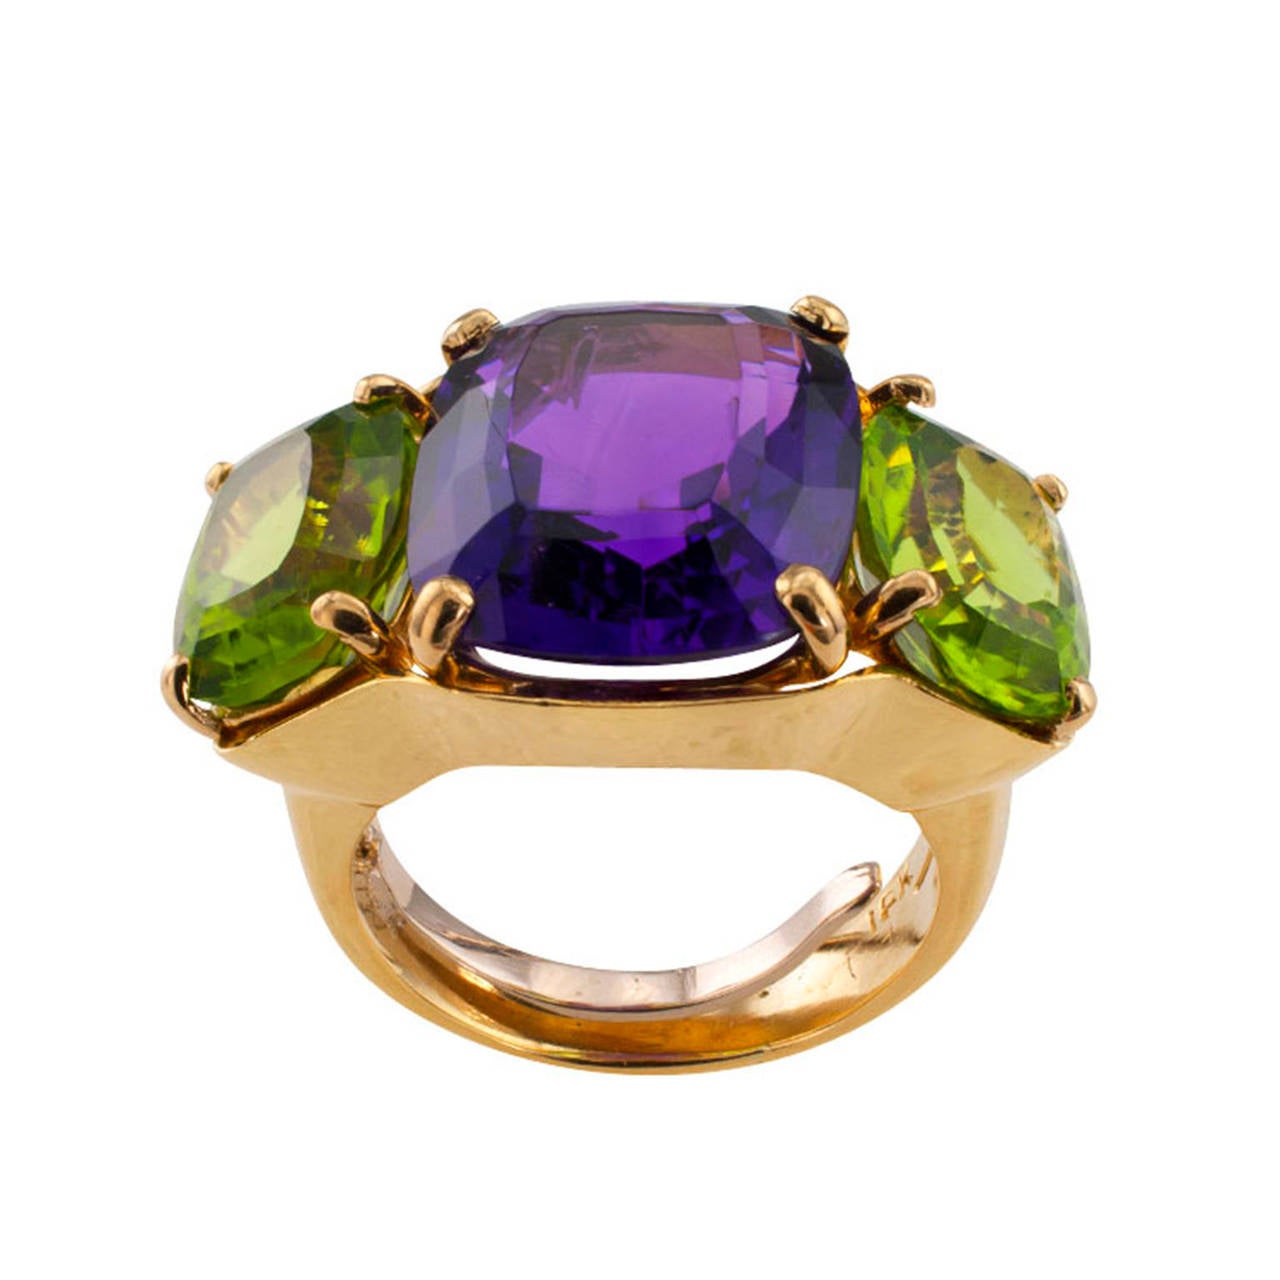 Elegant and bold with a lavish display of rich intense colors, this large designed ring features a trio of cushion-shaped gemstones, an amethyst between a pair of peridots, mounted in 18 karat gold, approximately 5/8